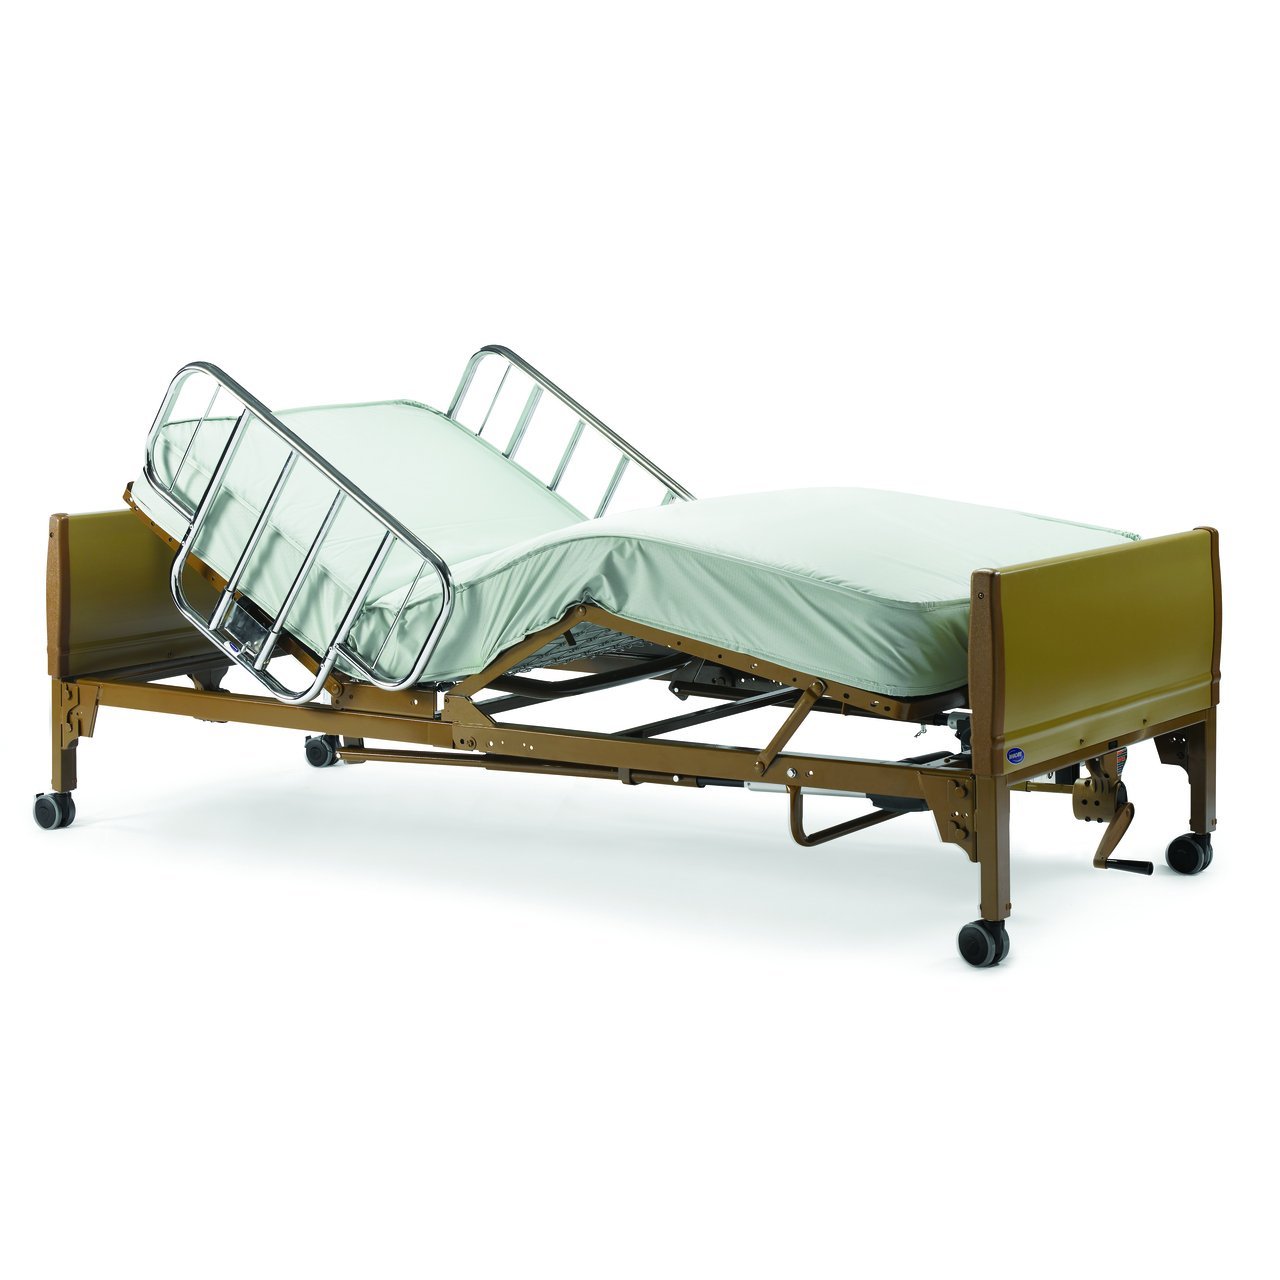 invacare hospital bed